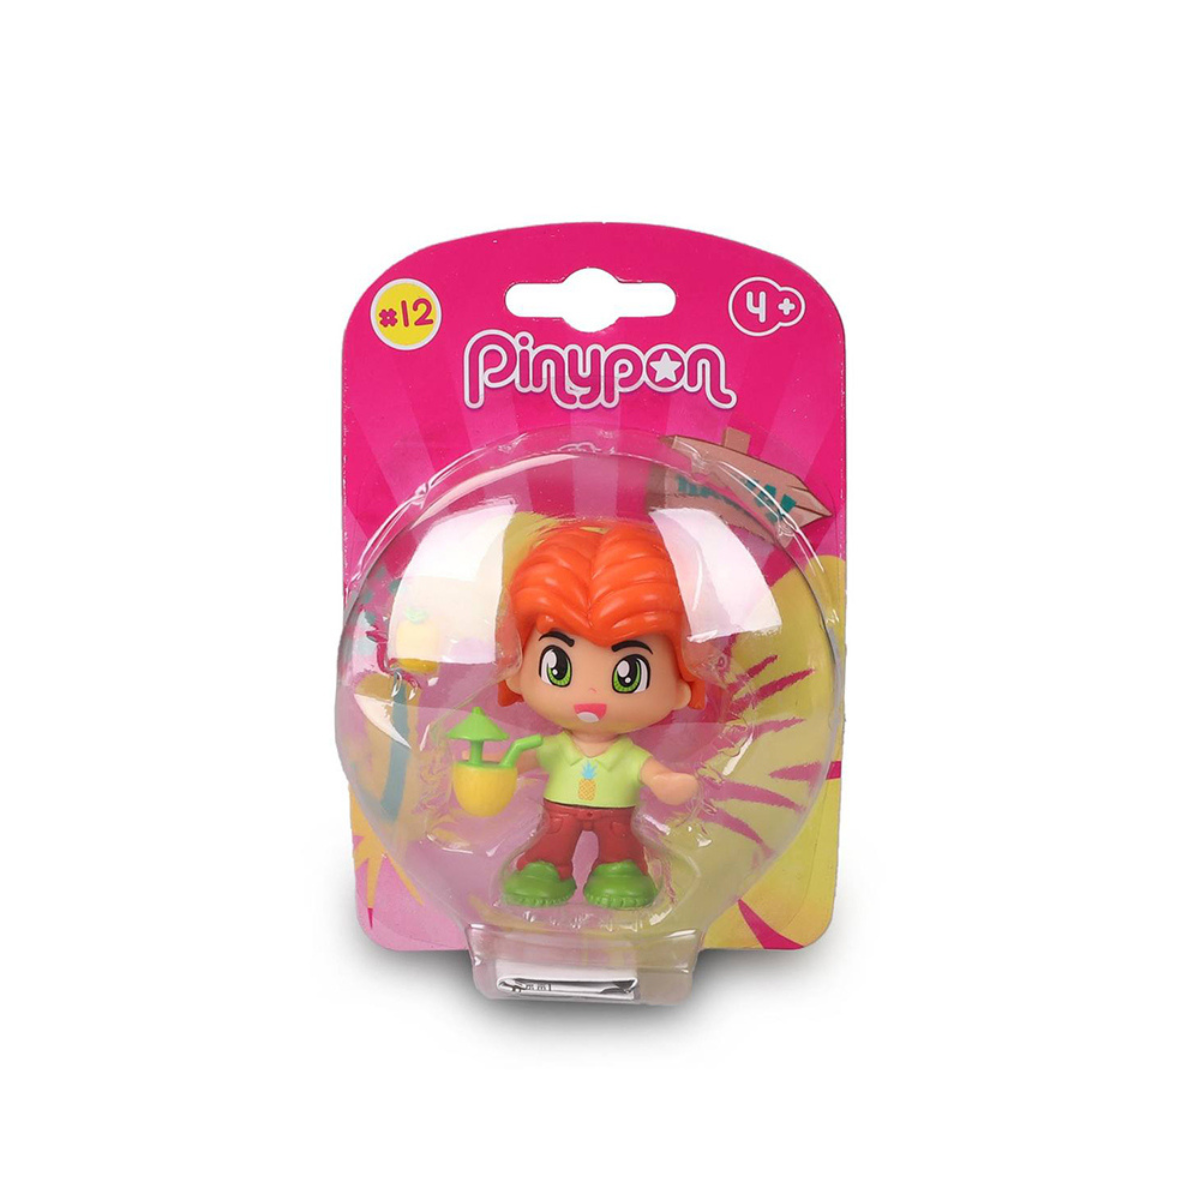 Pinypon Serie 12 Blister Individual